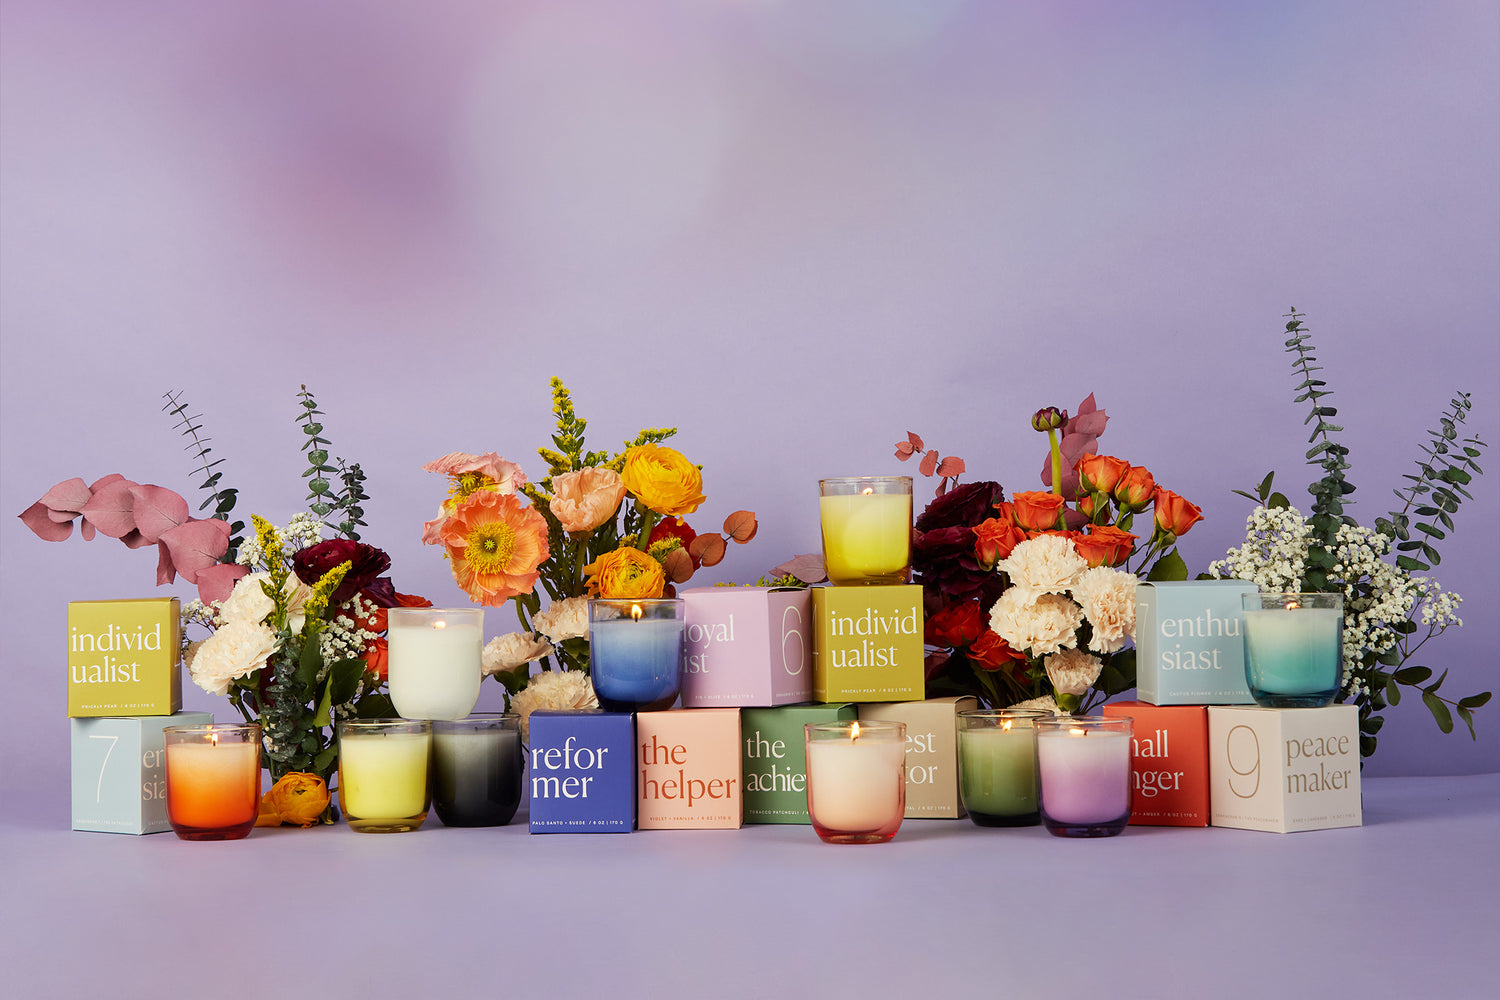 Enneagram candle collection with packaging and floral arrangements around the scented candles and candle packaging